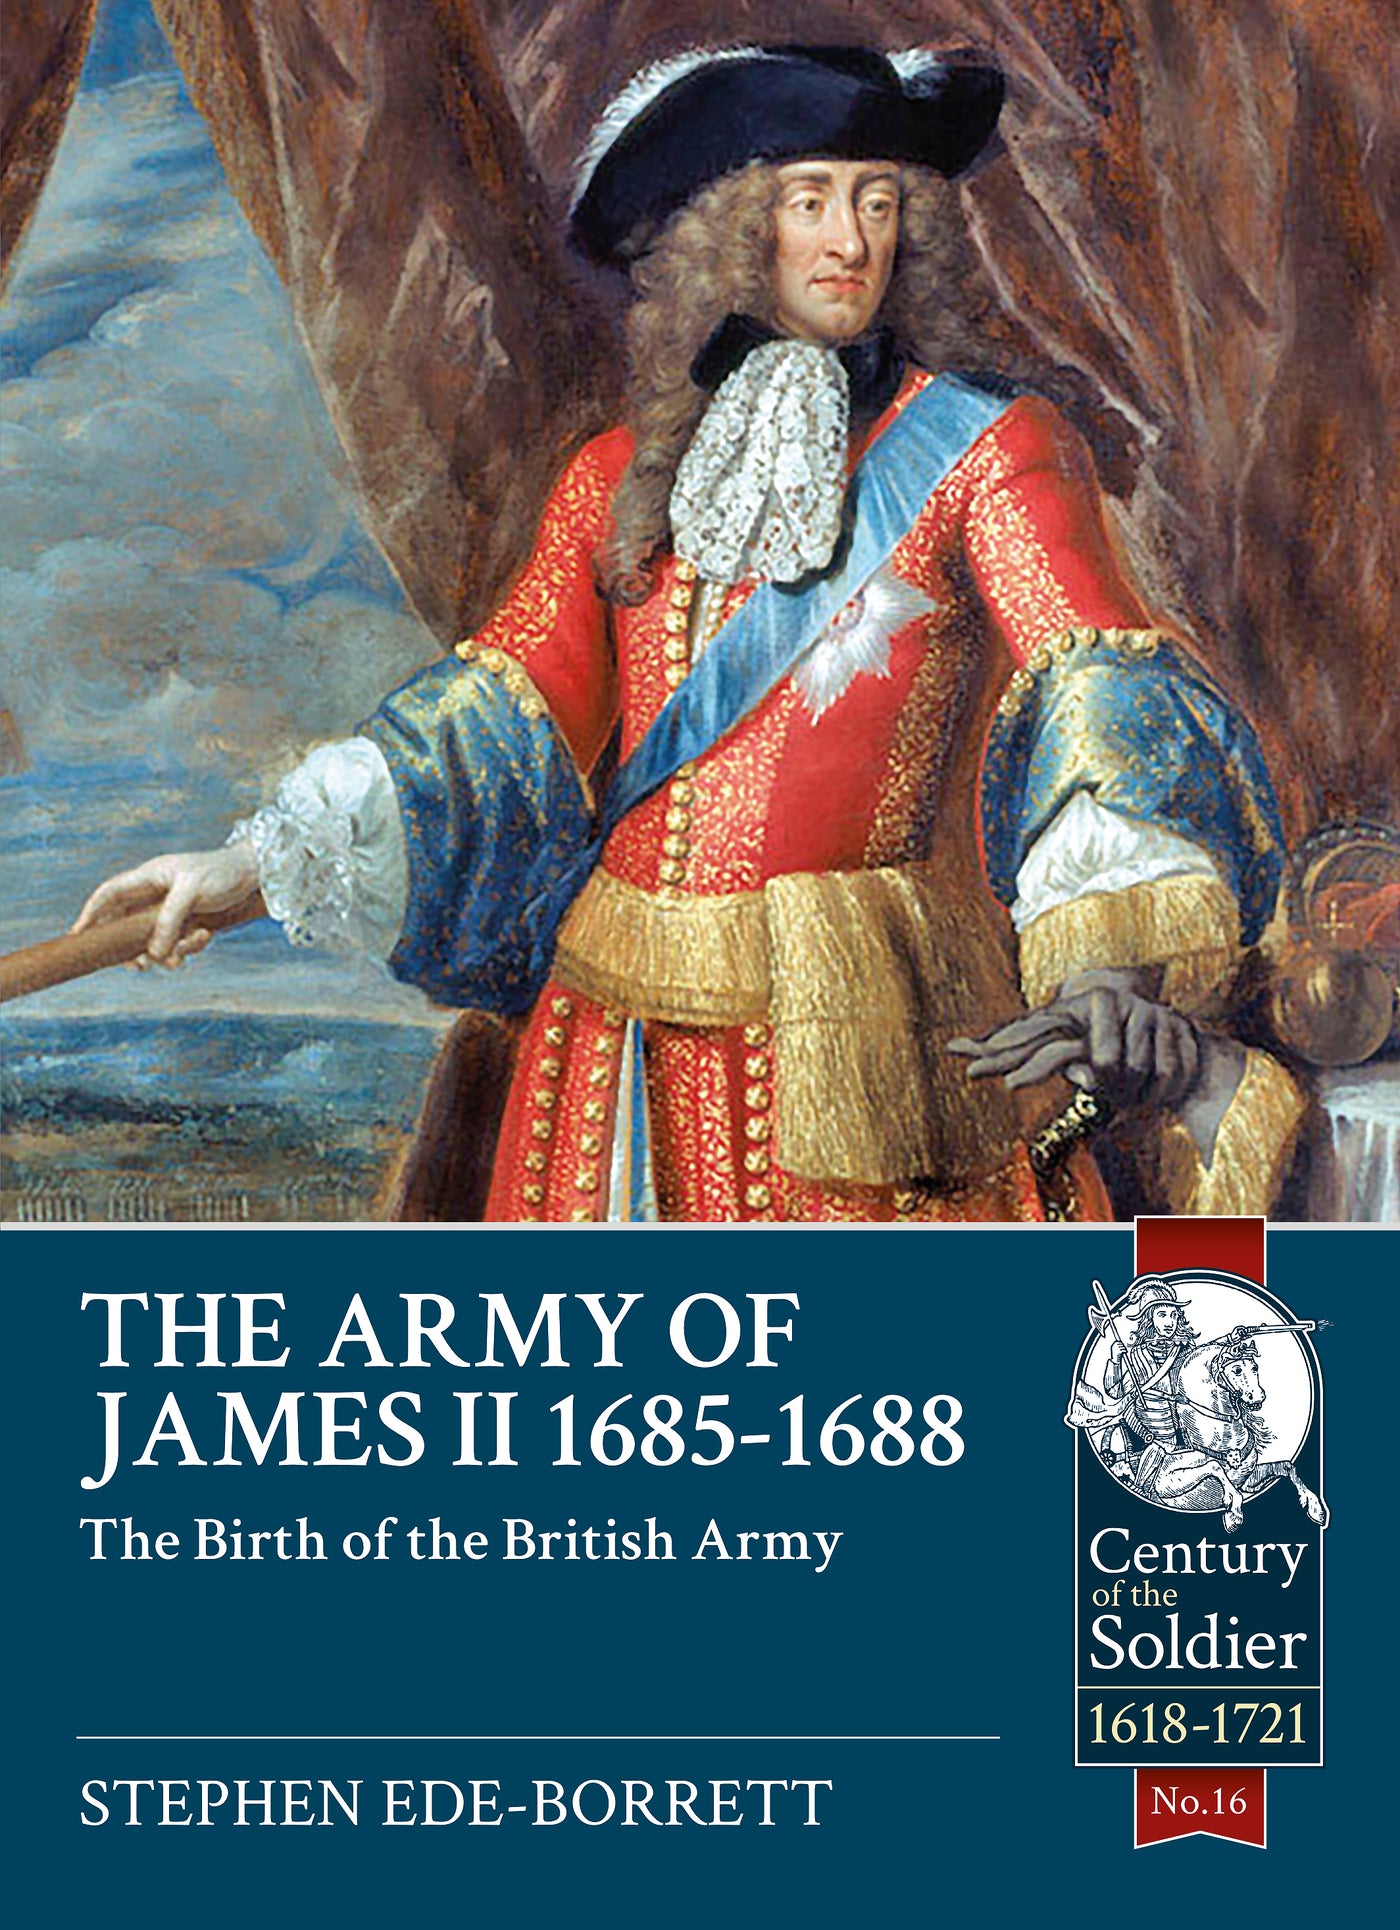 The Army of James II, 1685-1688